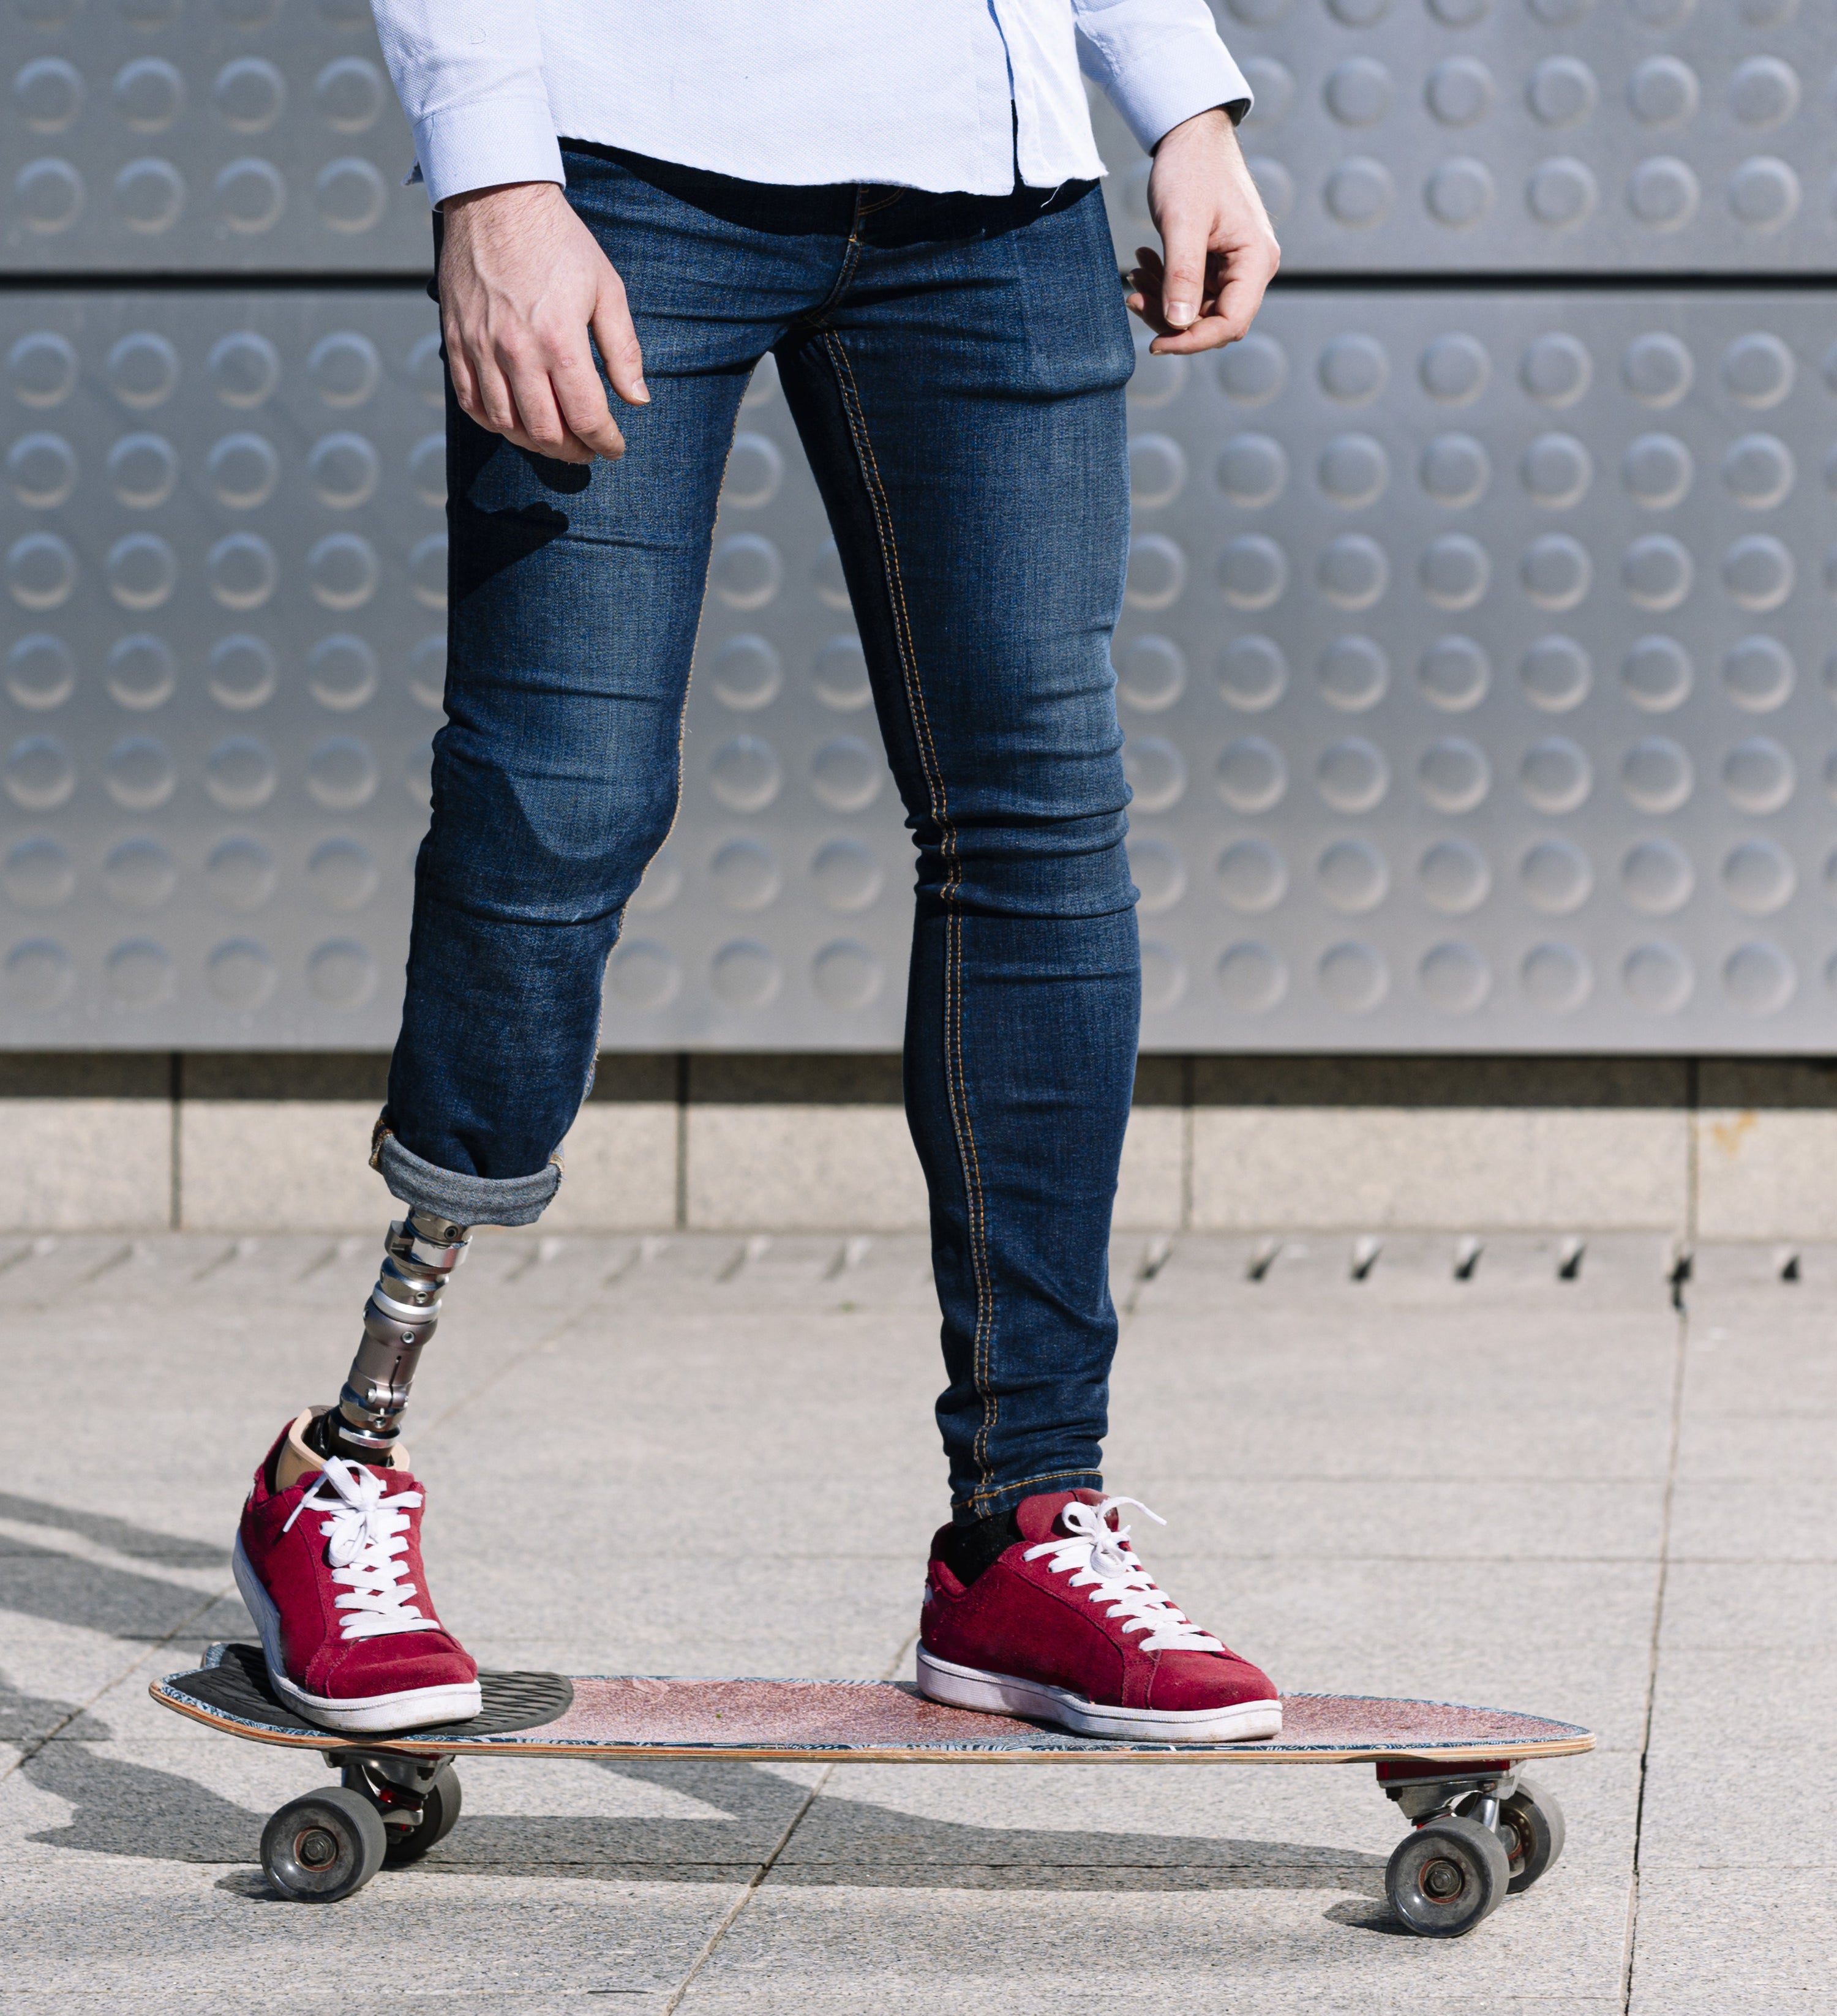 A person with a prosthetic leg skateboarding